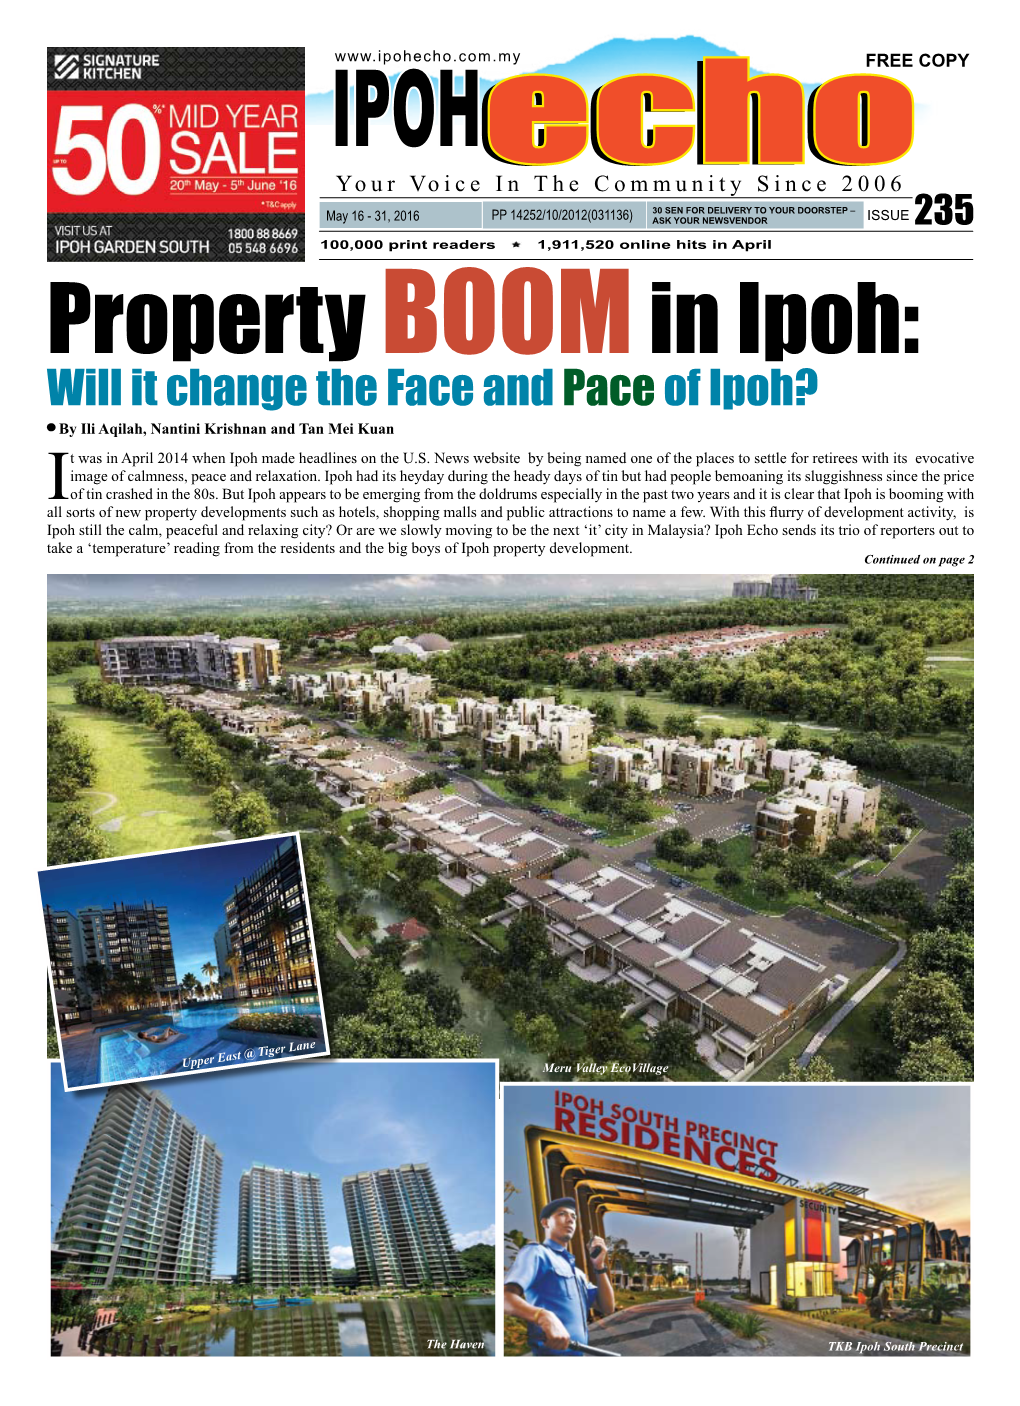 Will It Change the Face and Paceof Ipoh?